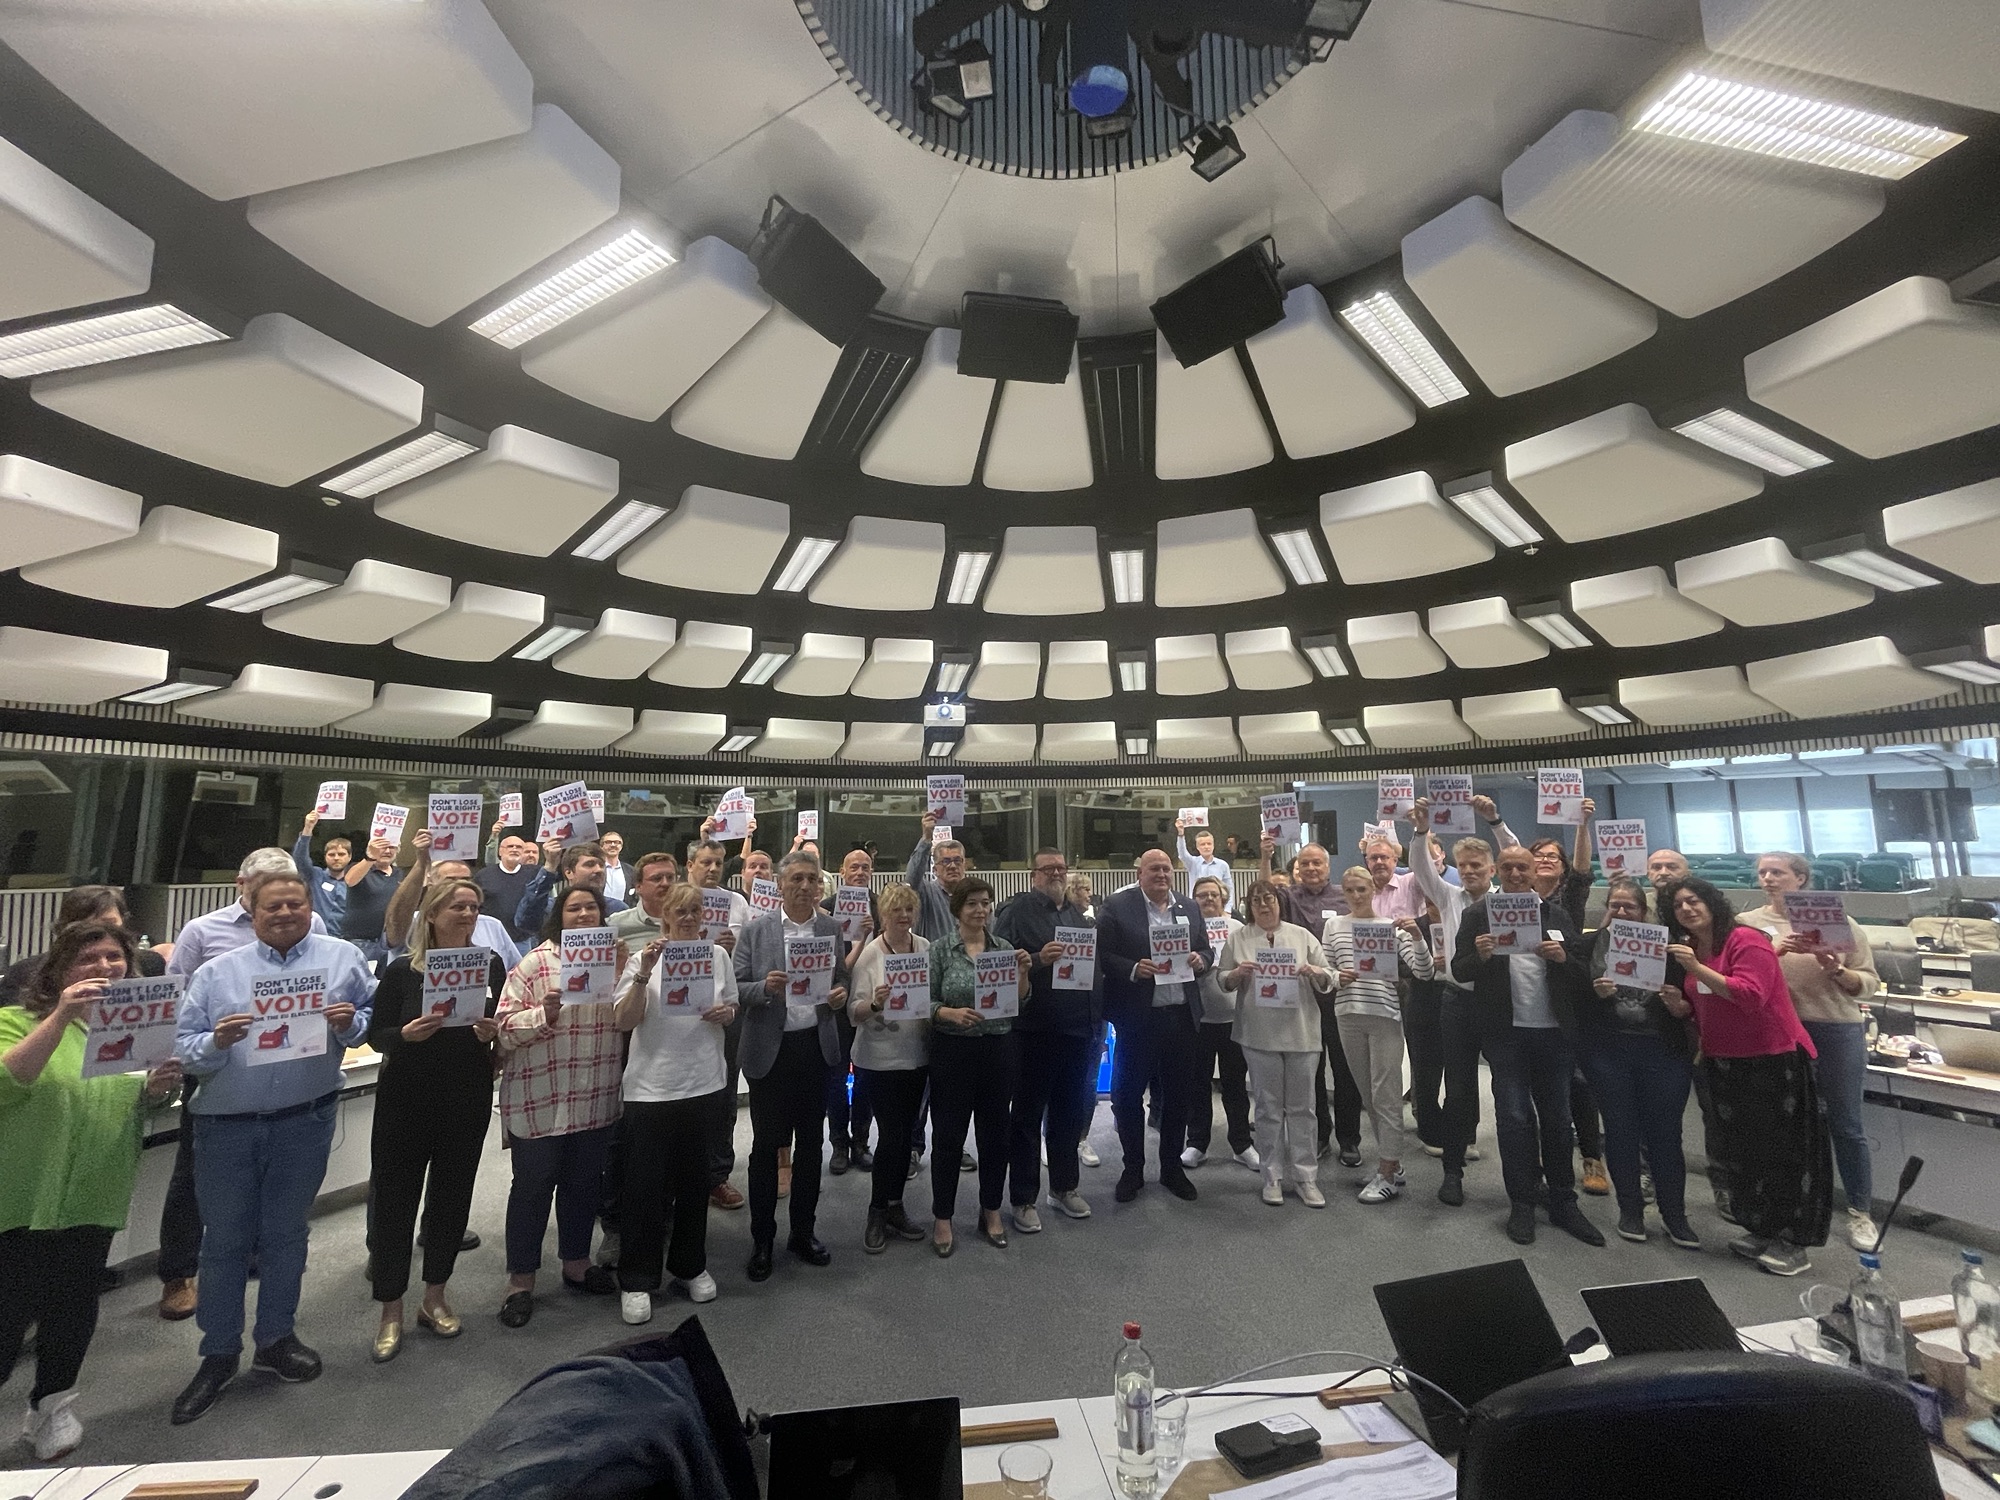 A Bruxelles l'esecutivo dell'Etf - European Transport Workers' Federation